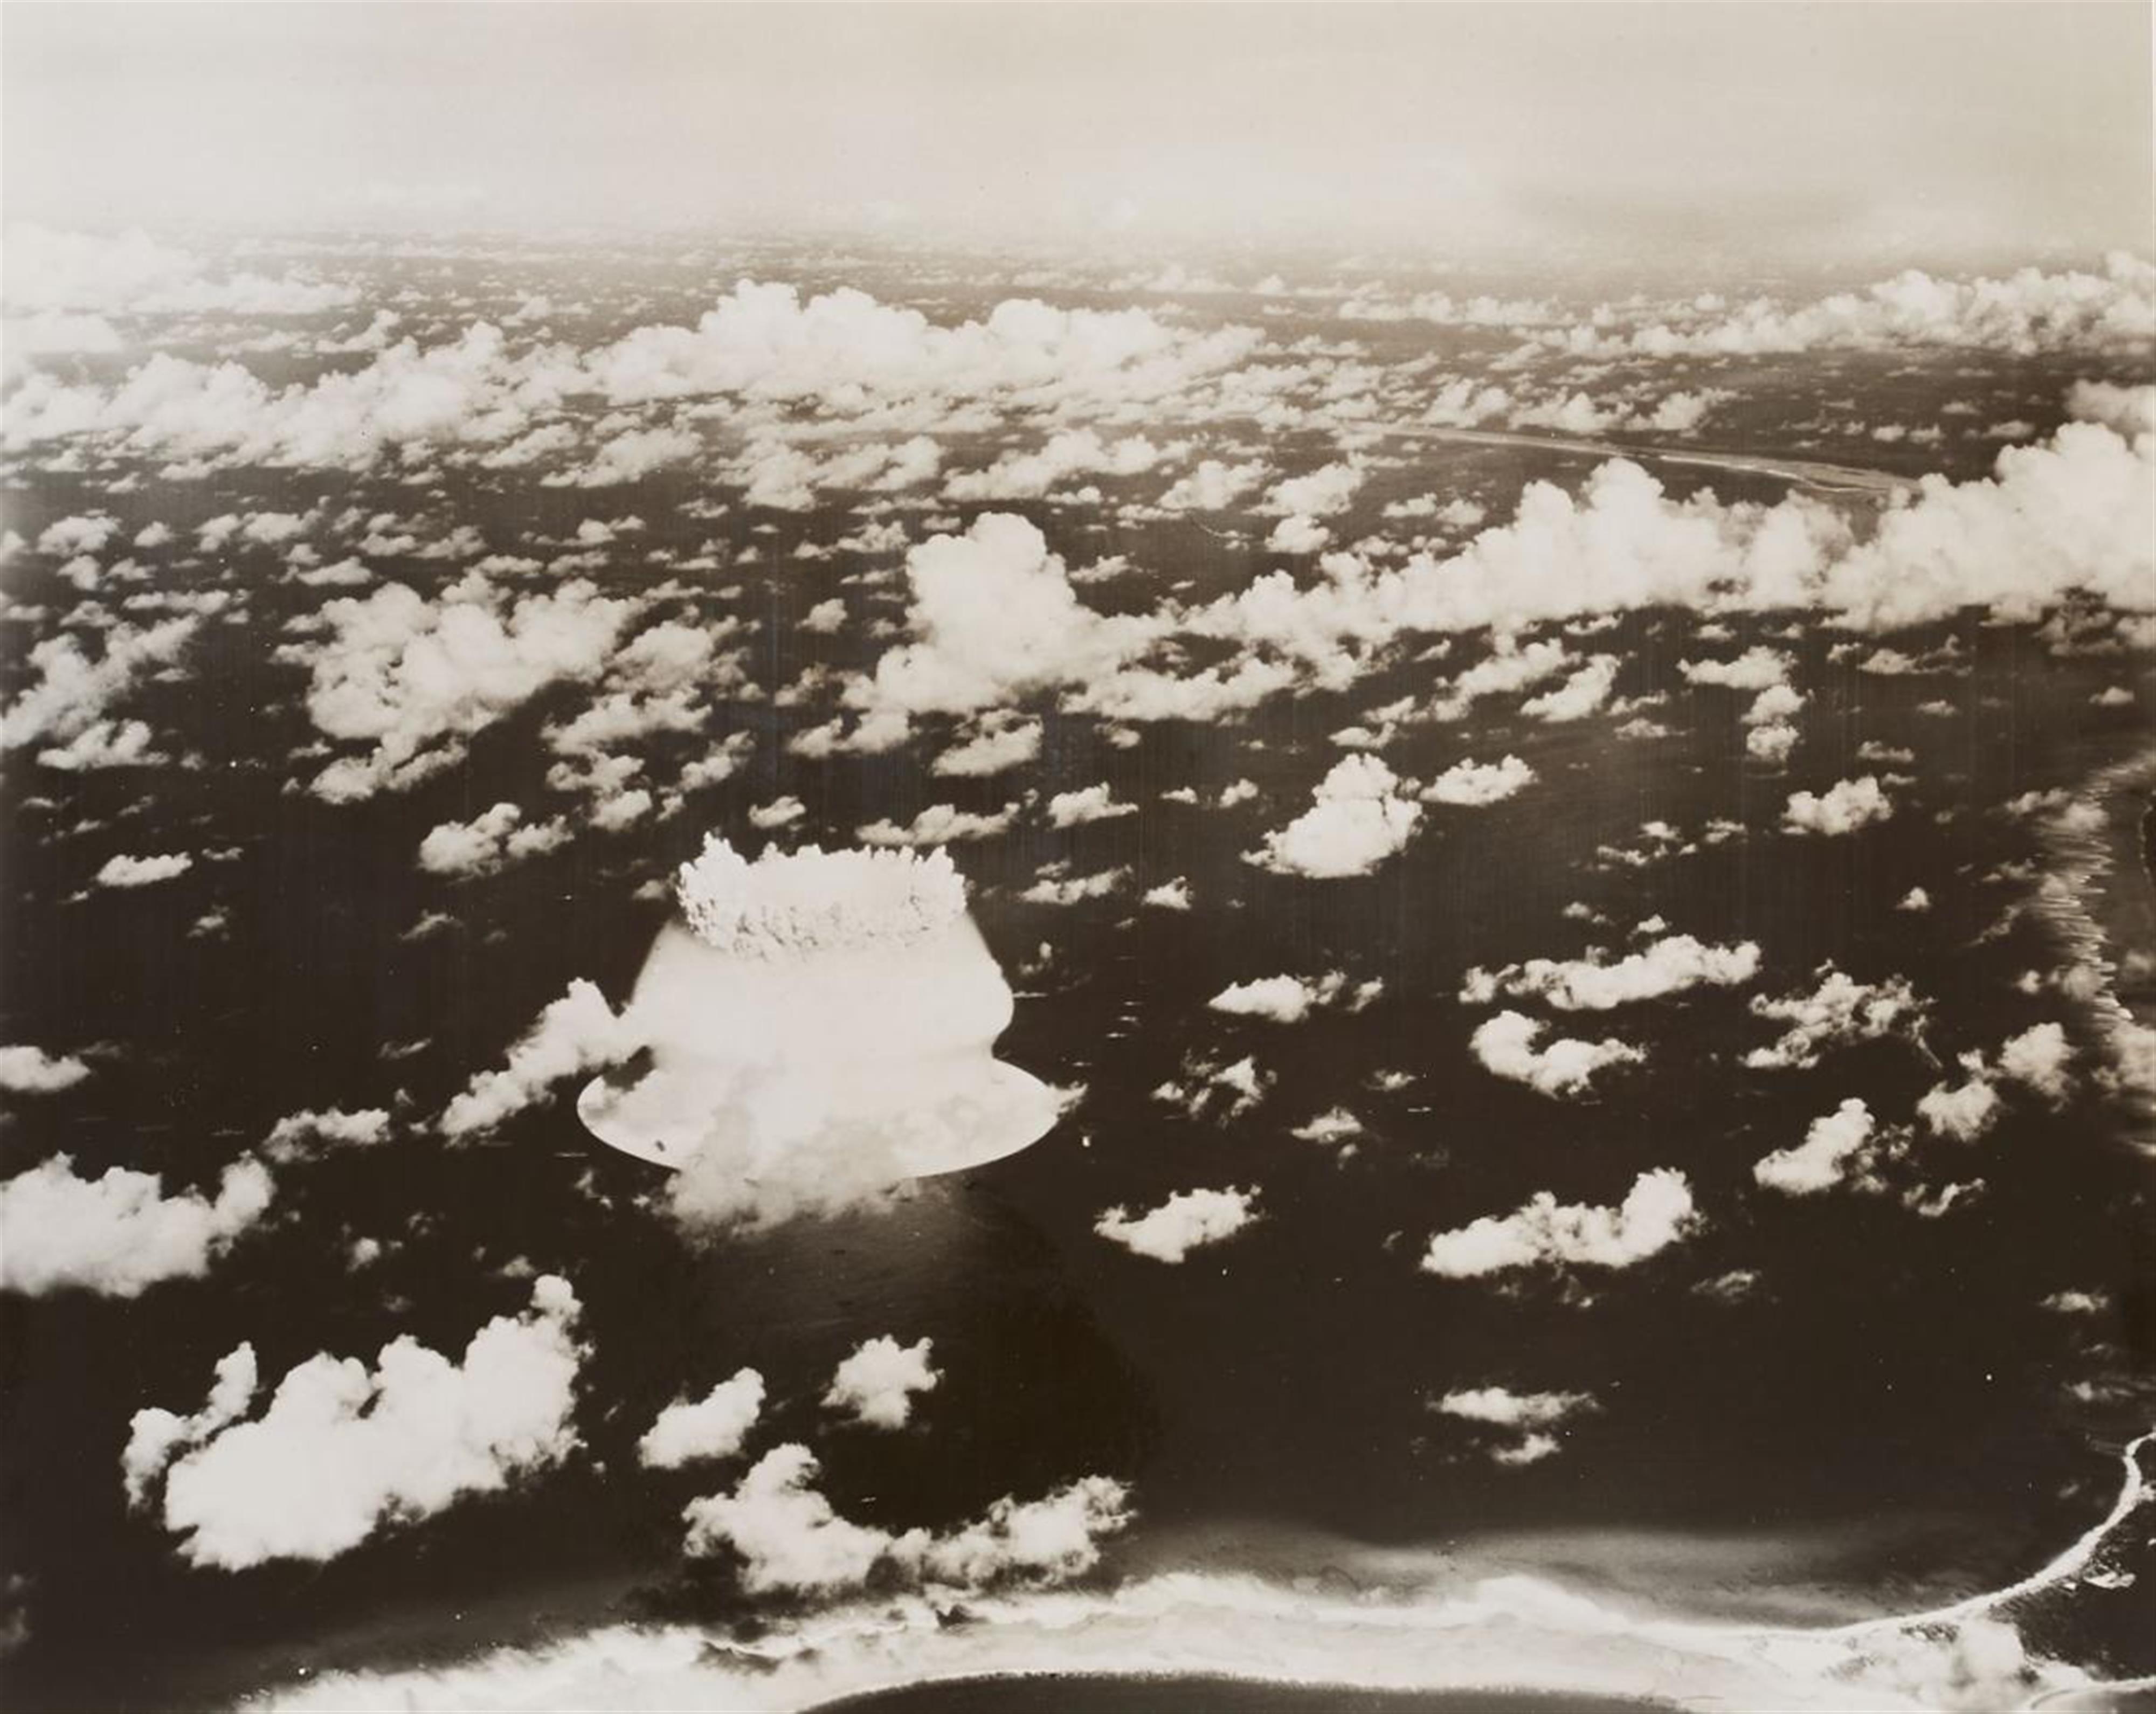 Joint Army Task Force One Photo - Baker Day atomic Explosion - image-1